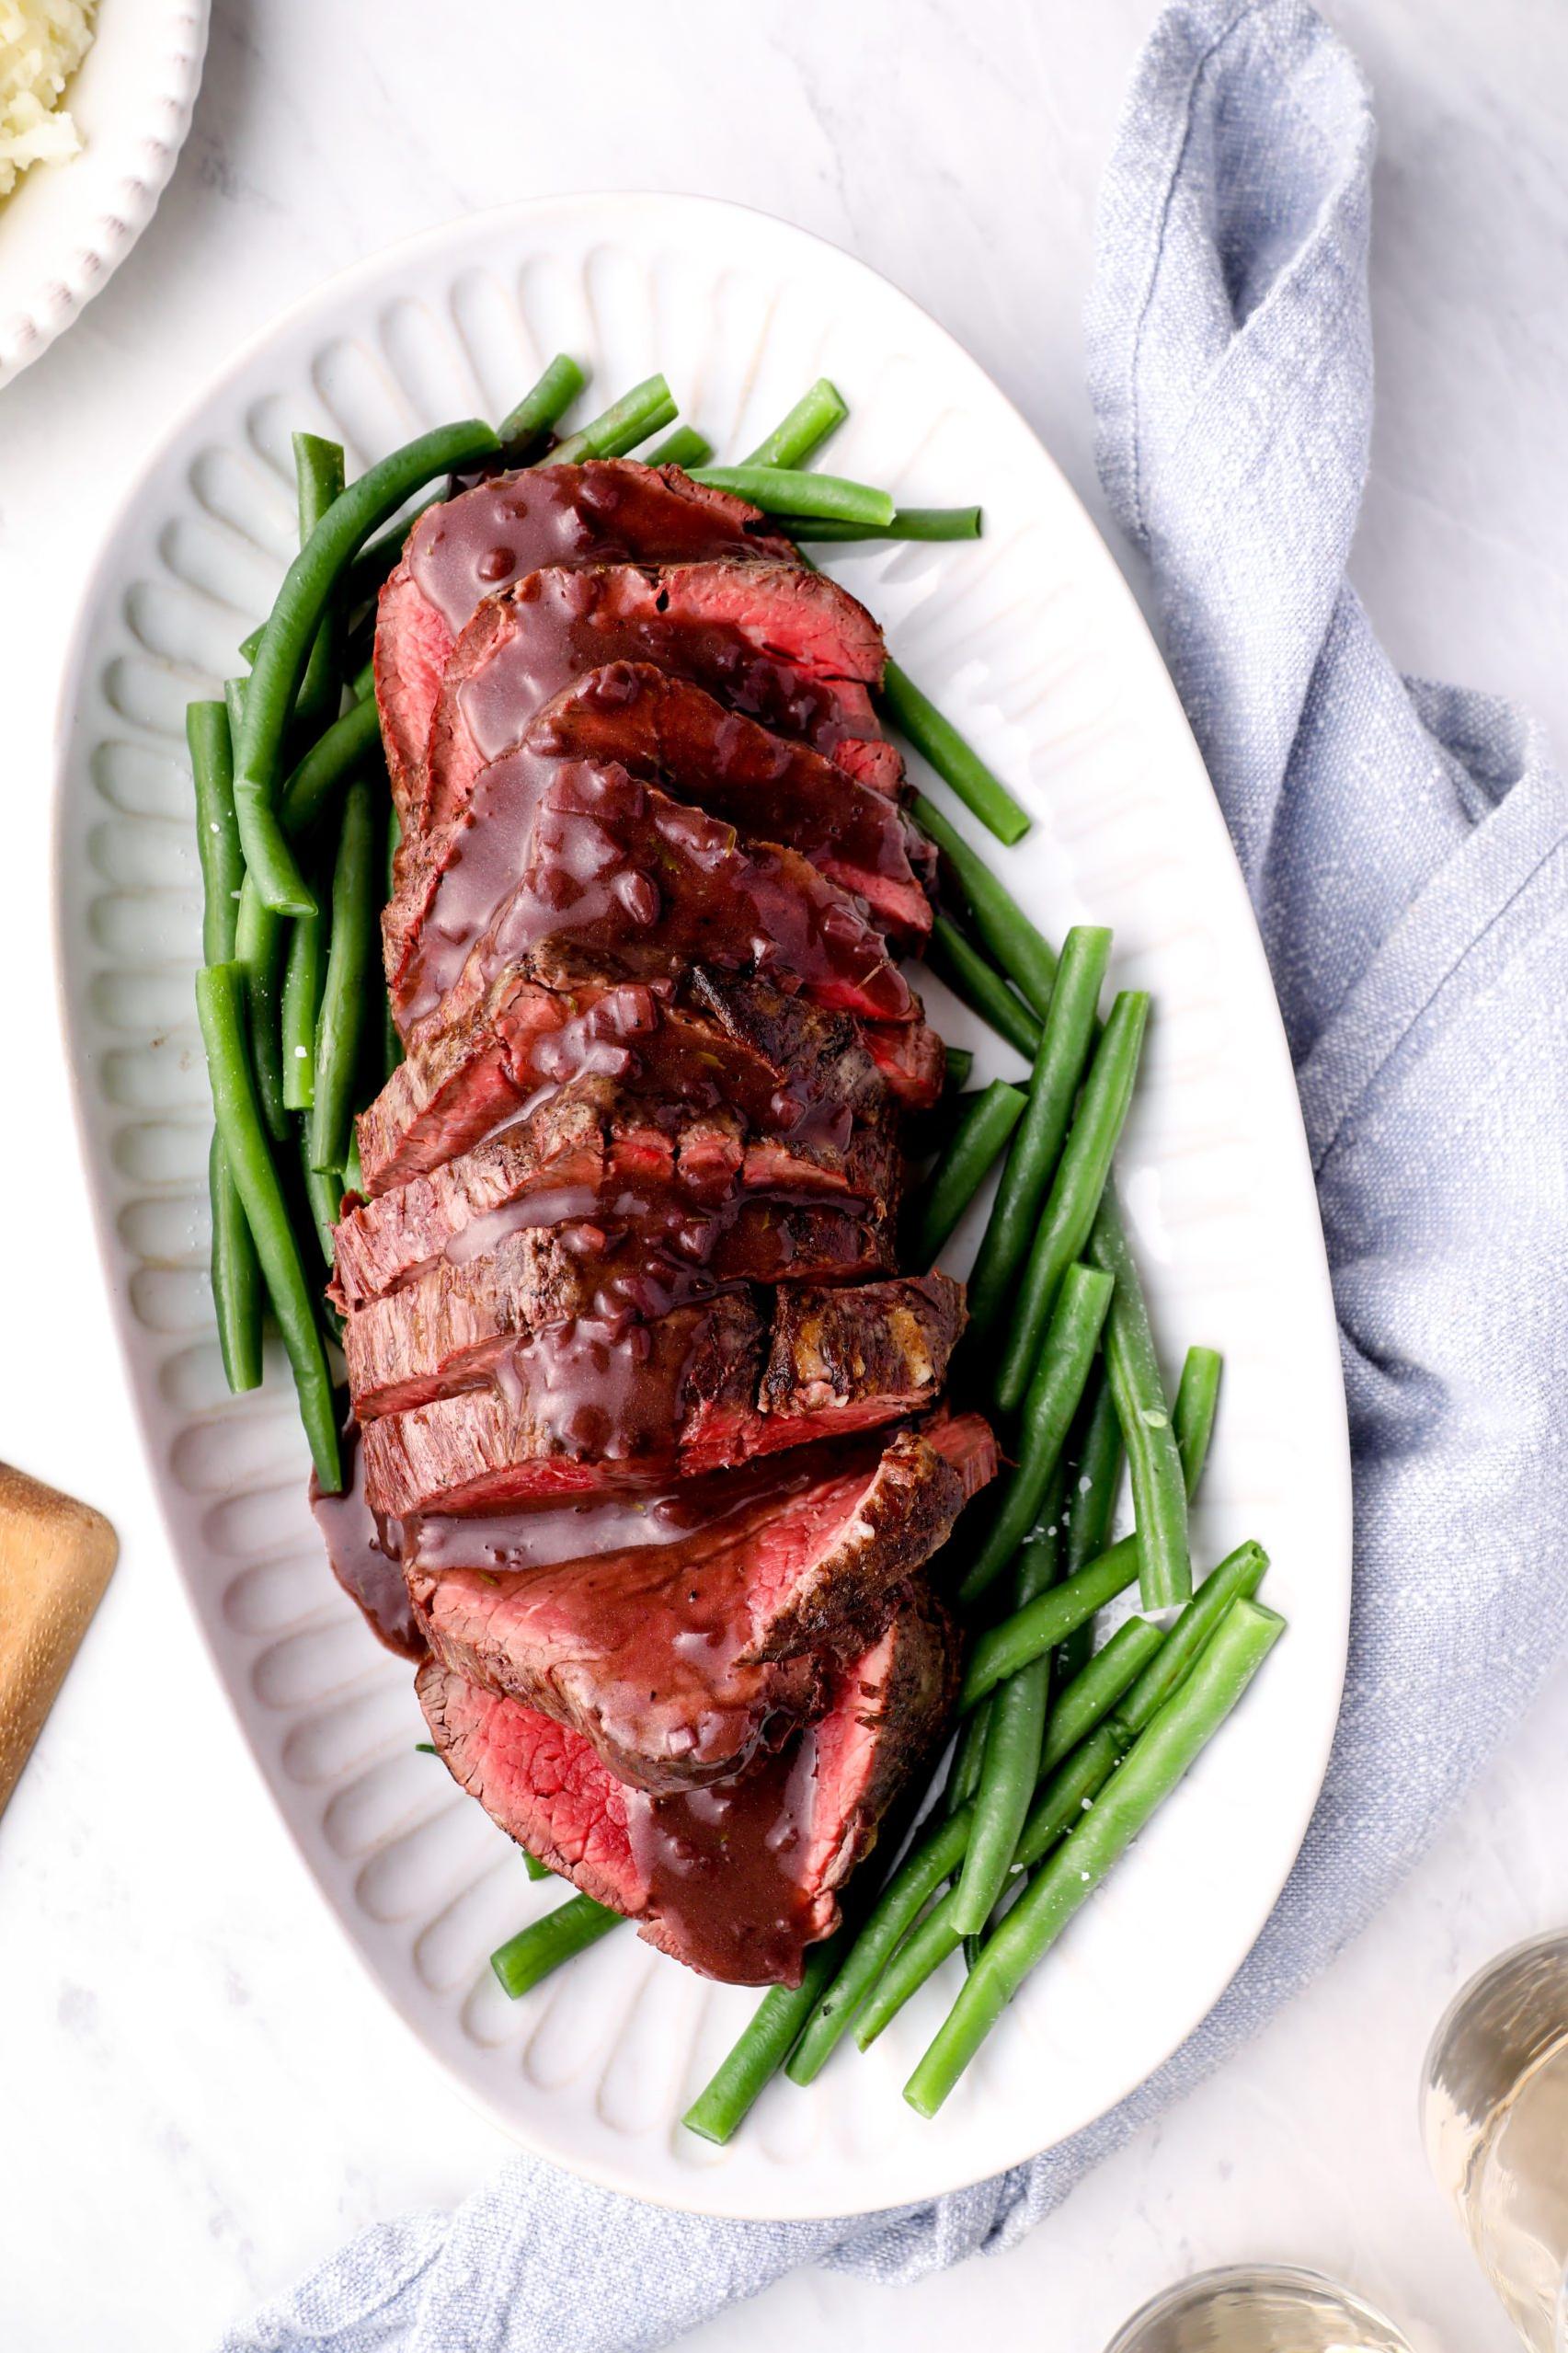  Juicy beef tenderloin drizzled with rich and savory red wine reduction.